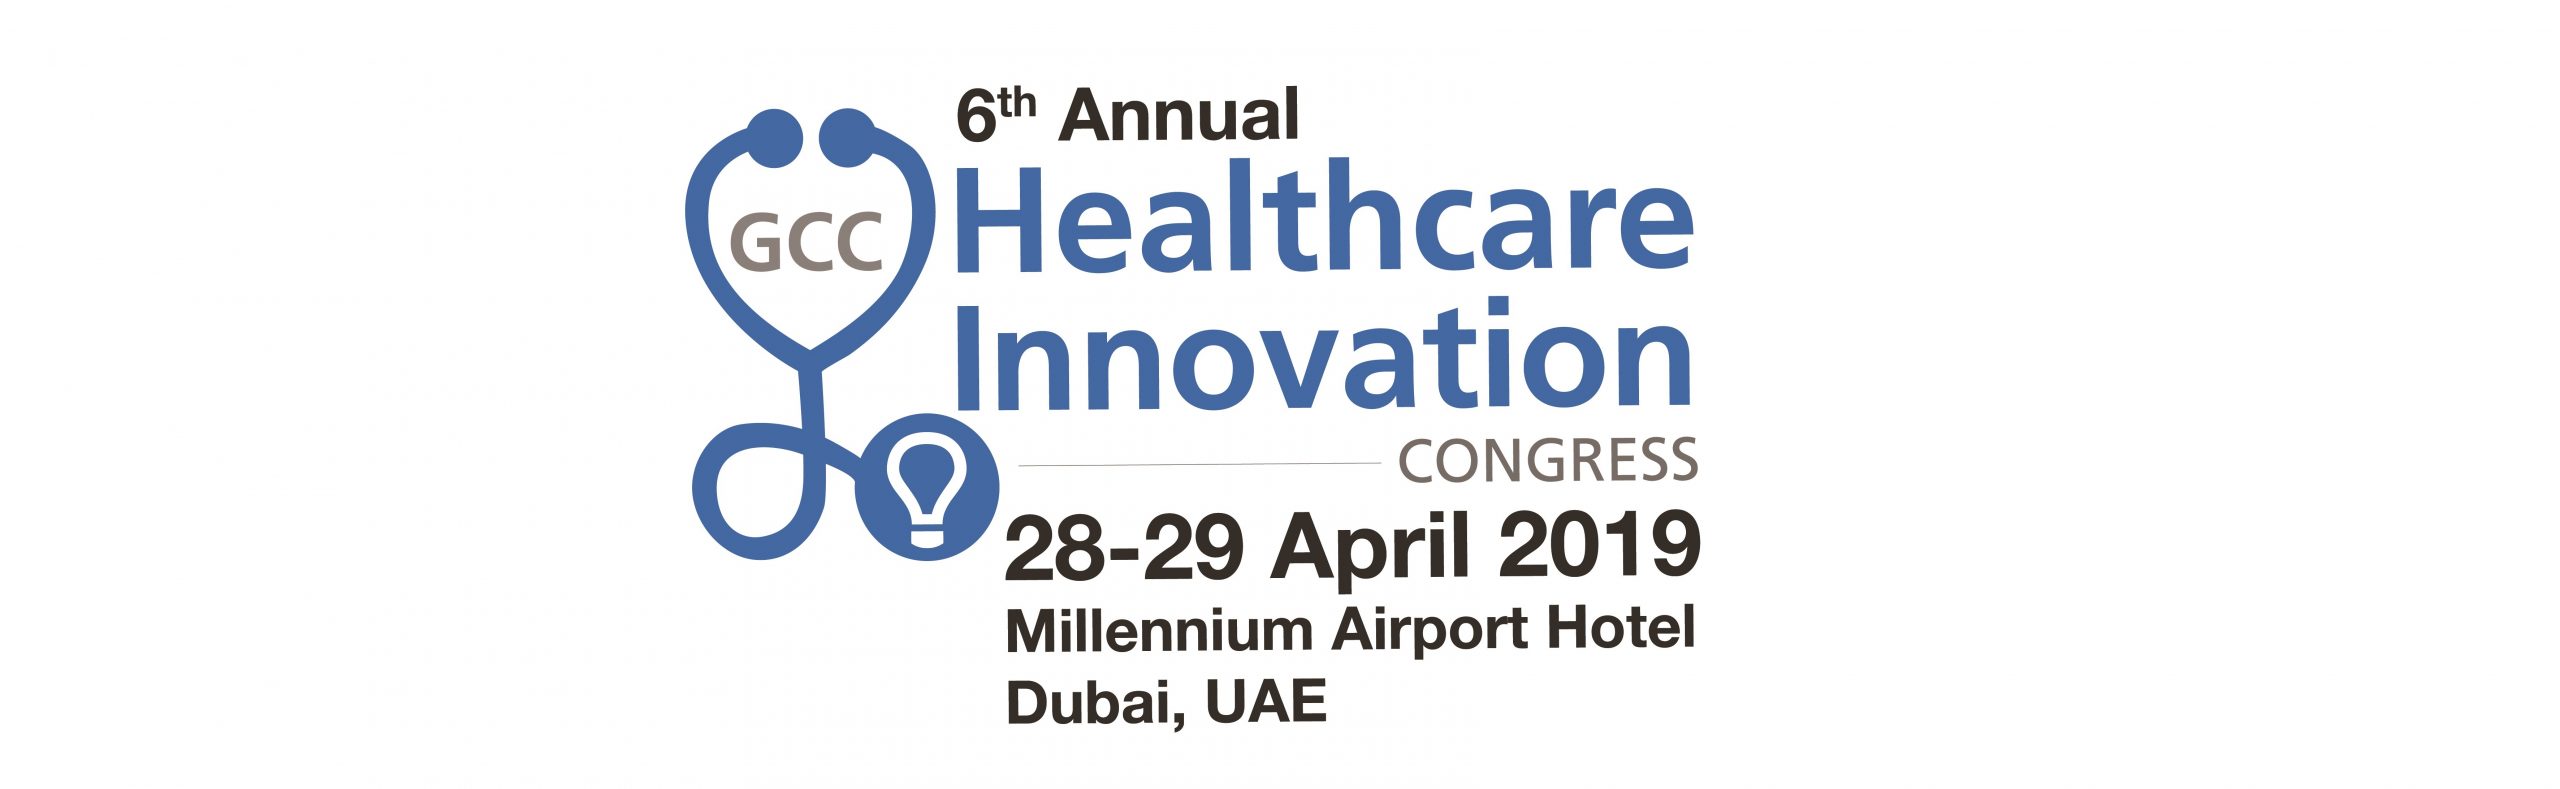 6th Annual GCC Healthcare Innovation Congress - Coming Soon in UAE